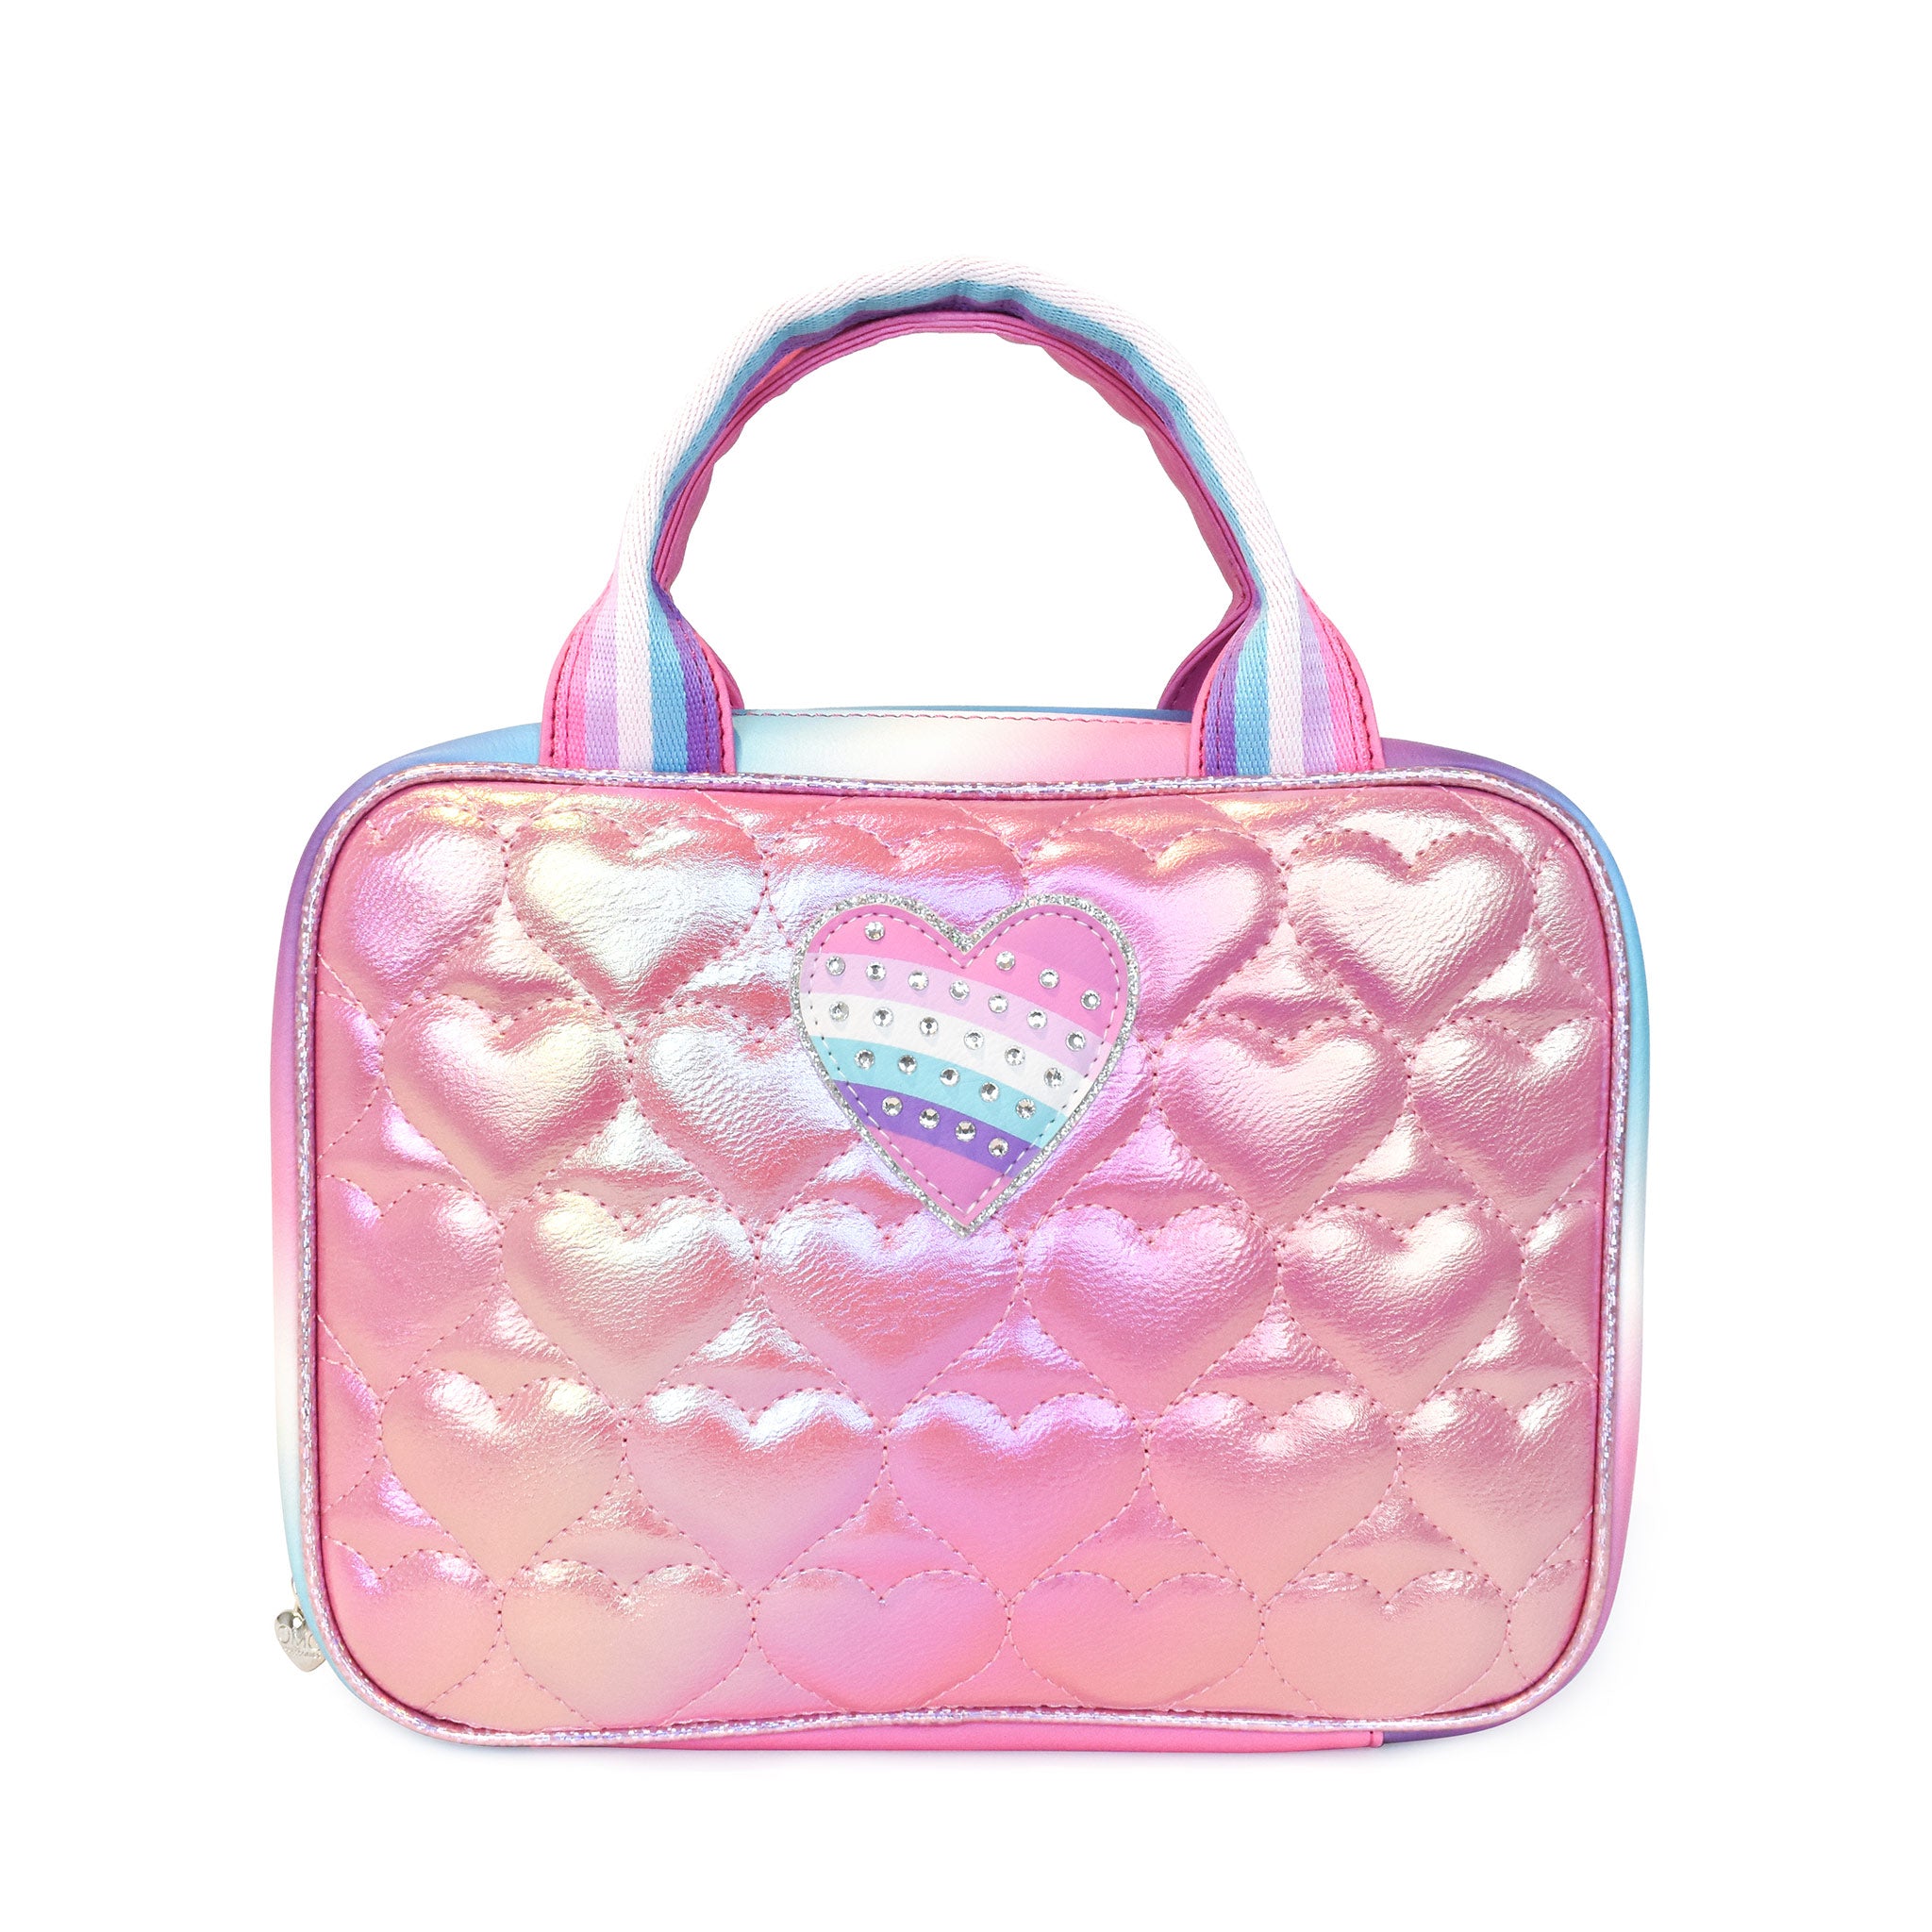 Front view of a pink metallic rectangular lunch bag with heart quilting and a rhinestone heart applique